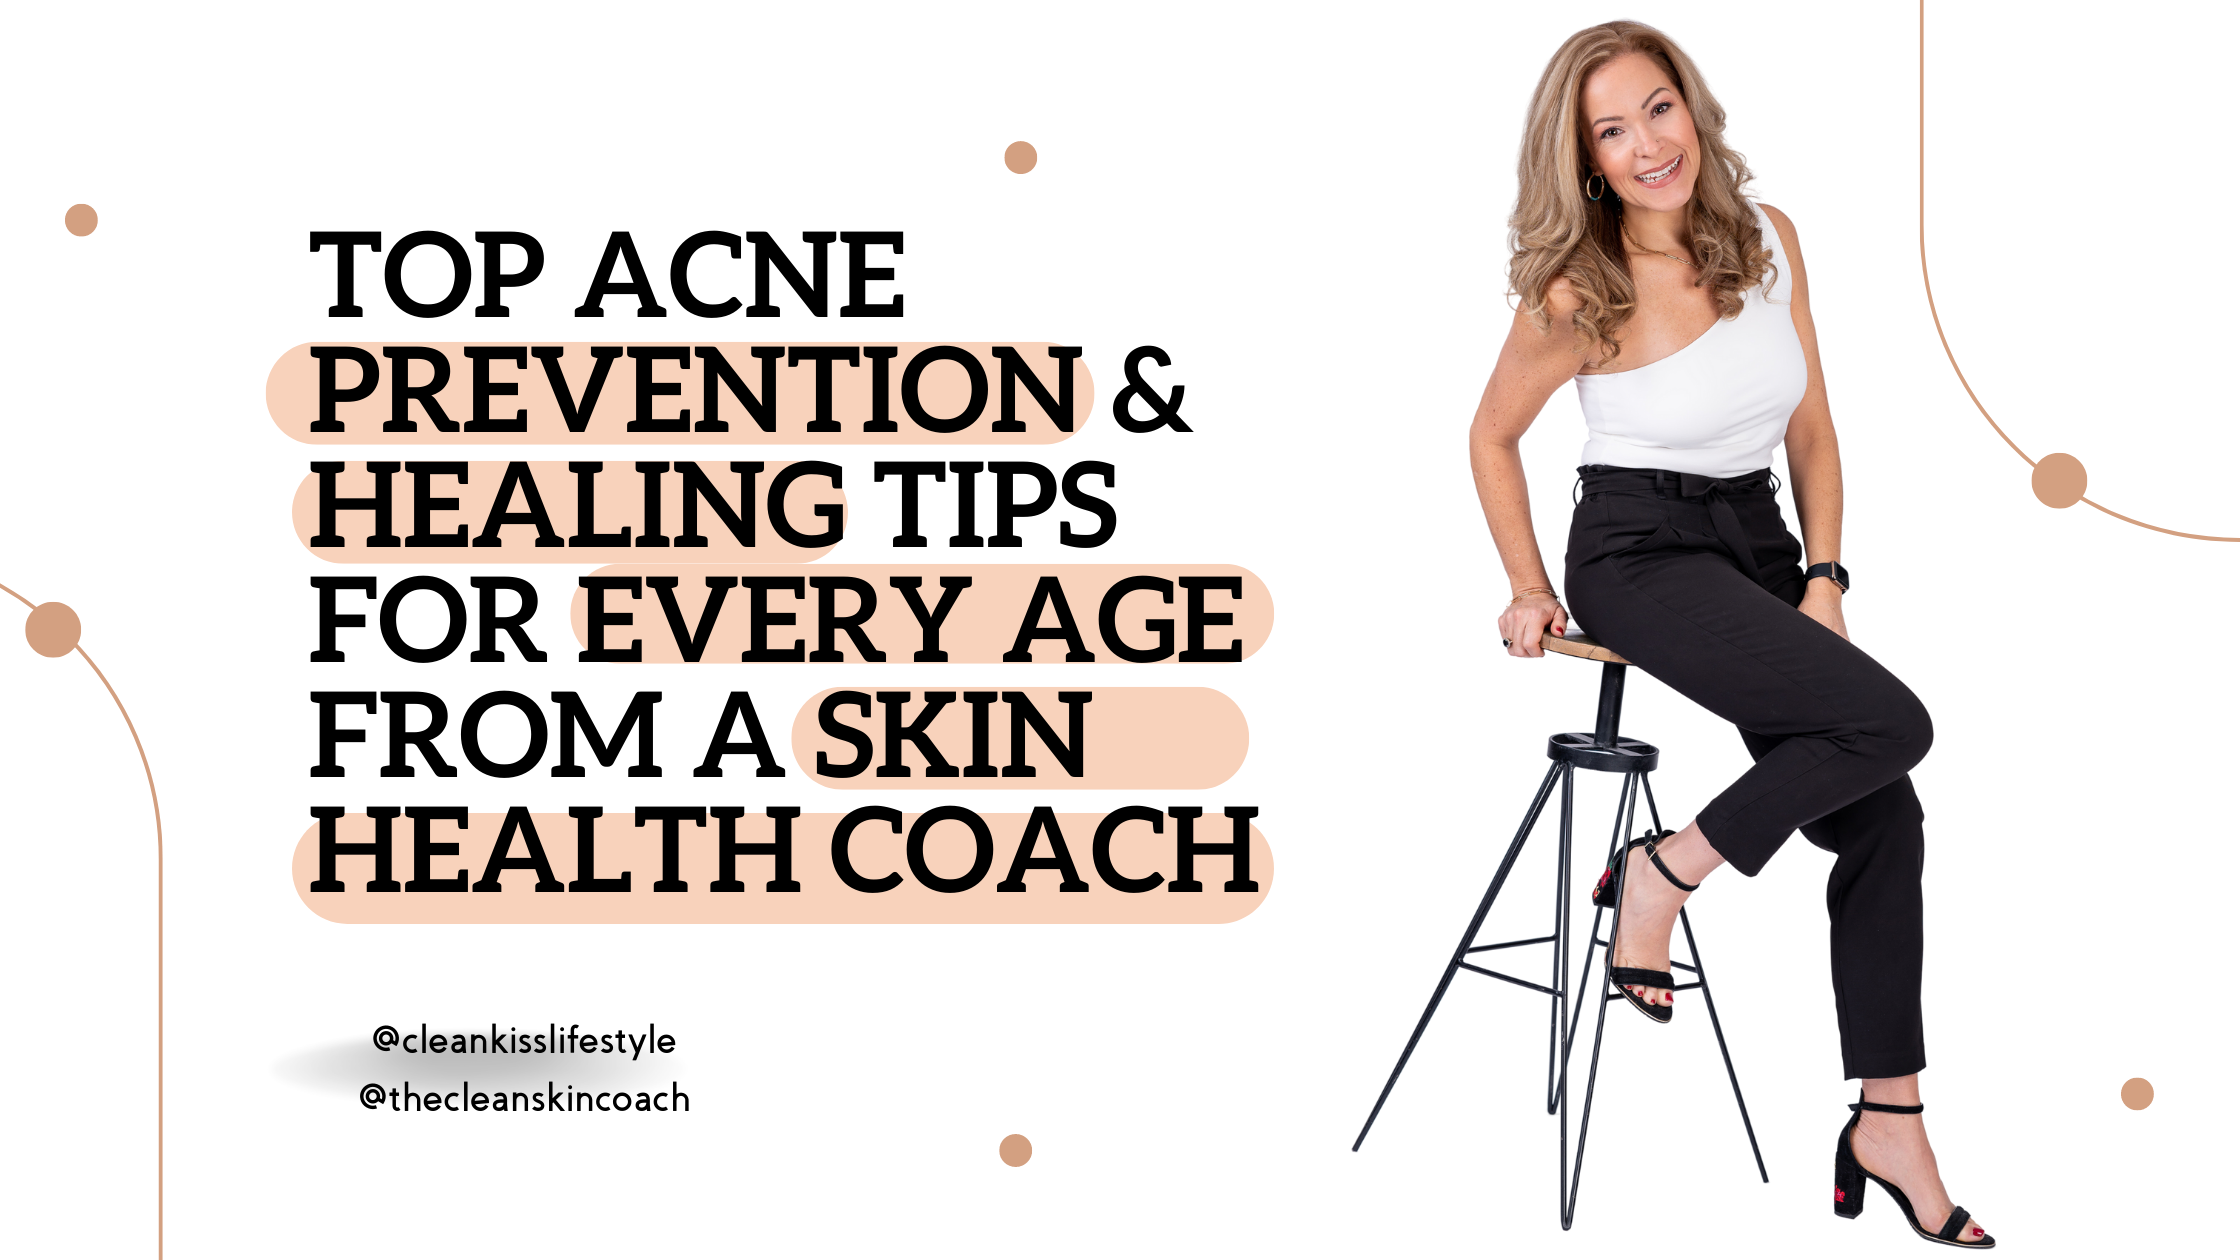 Top Acne Prevention & Healing Tips for Every Age from a Skin Health Coach